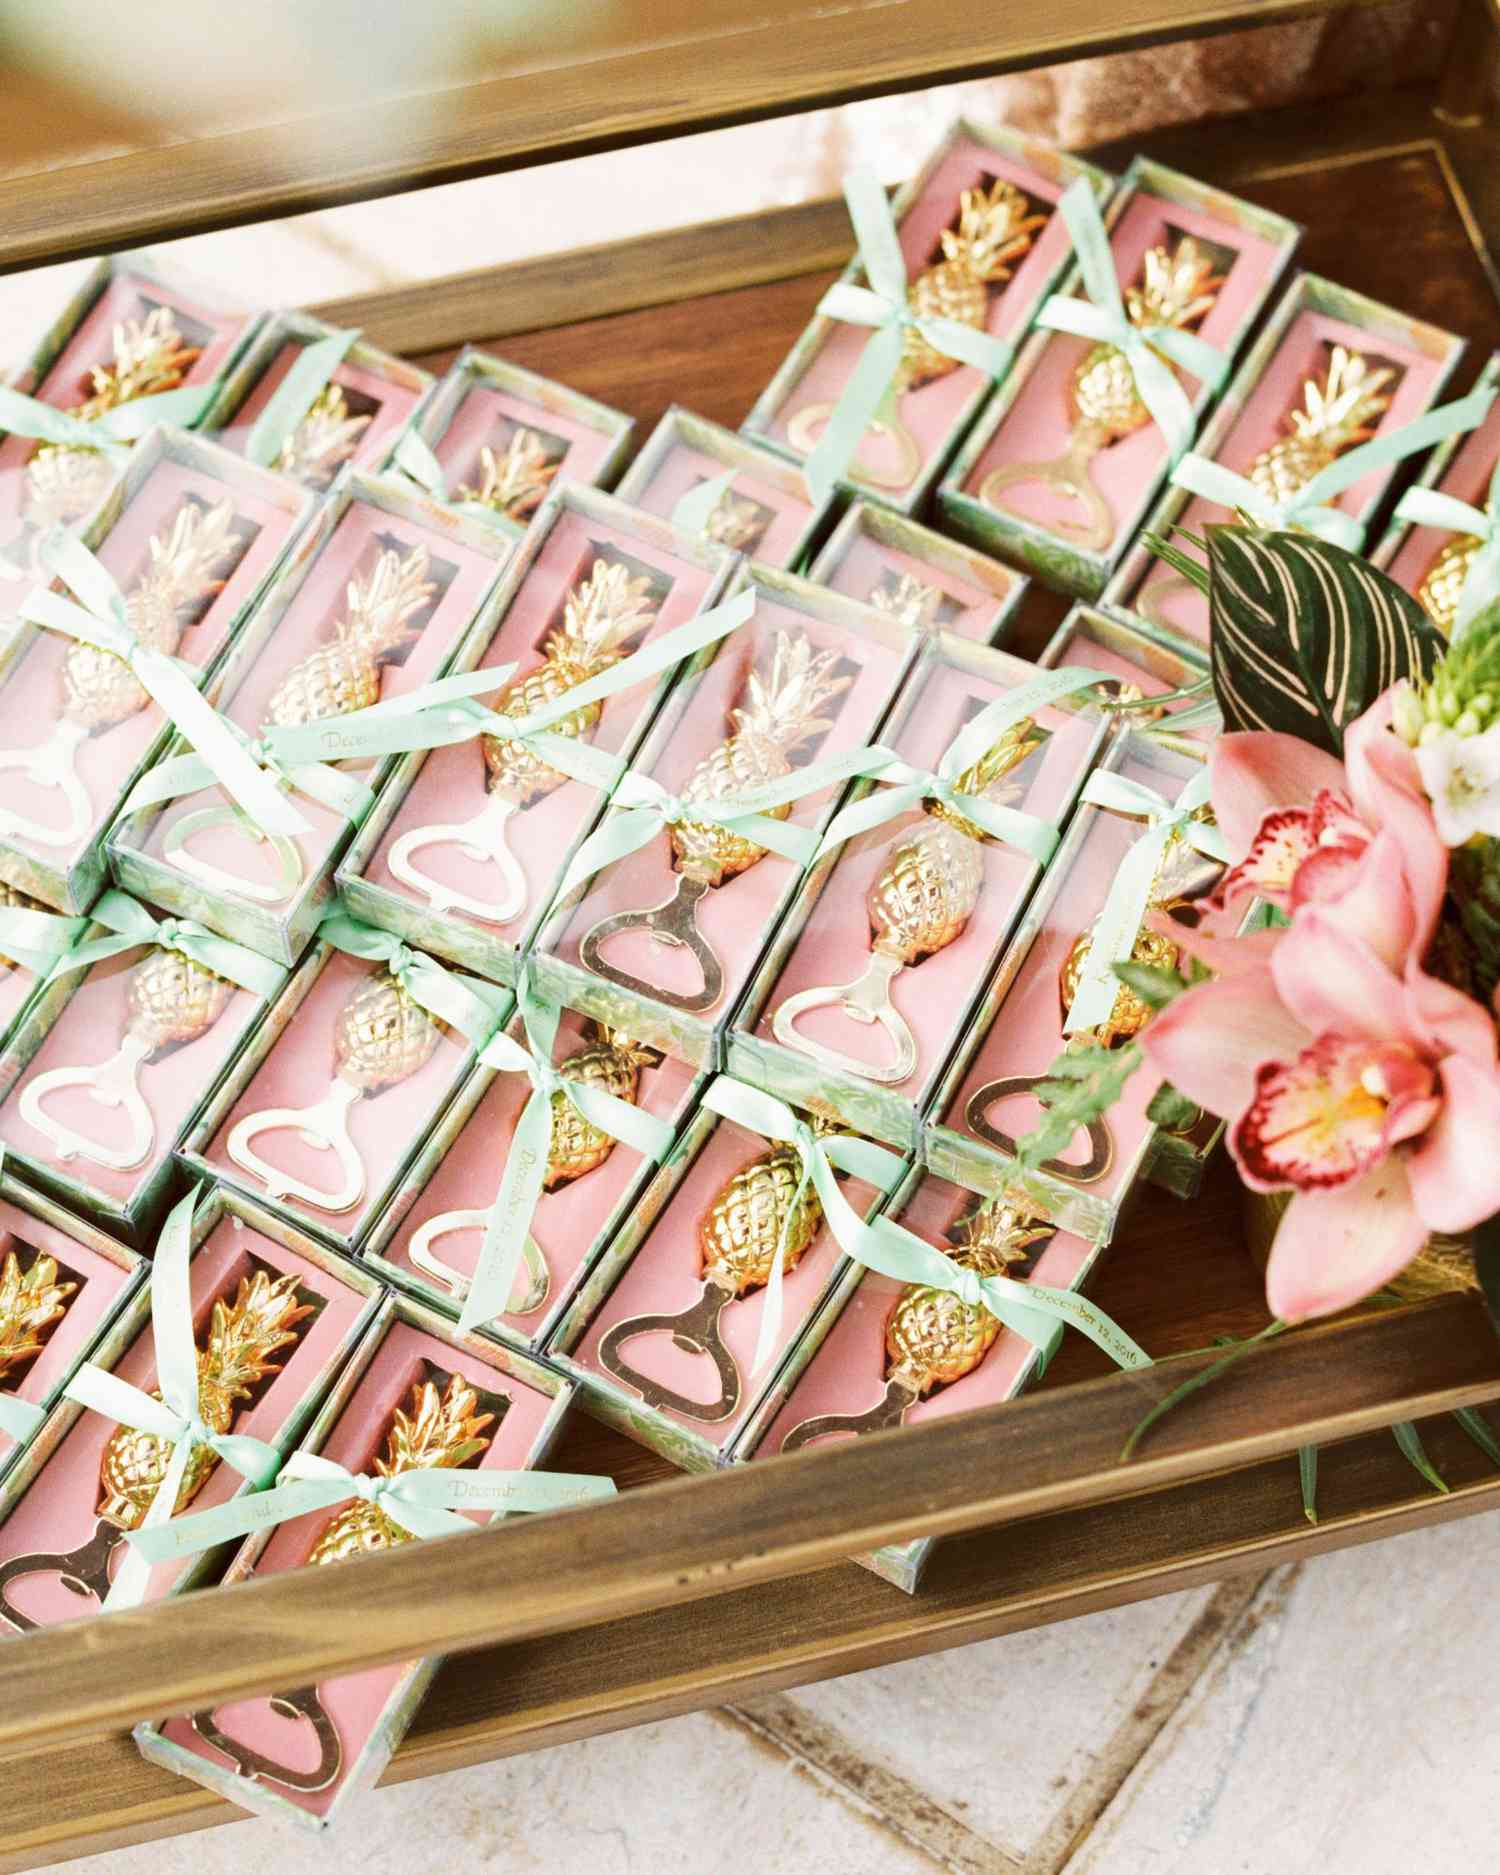 50 Creative Wedding Favors That Will